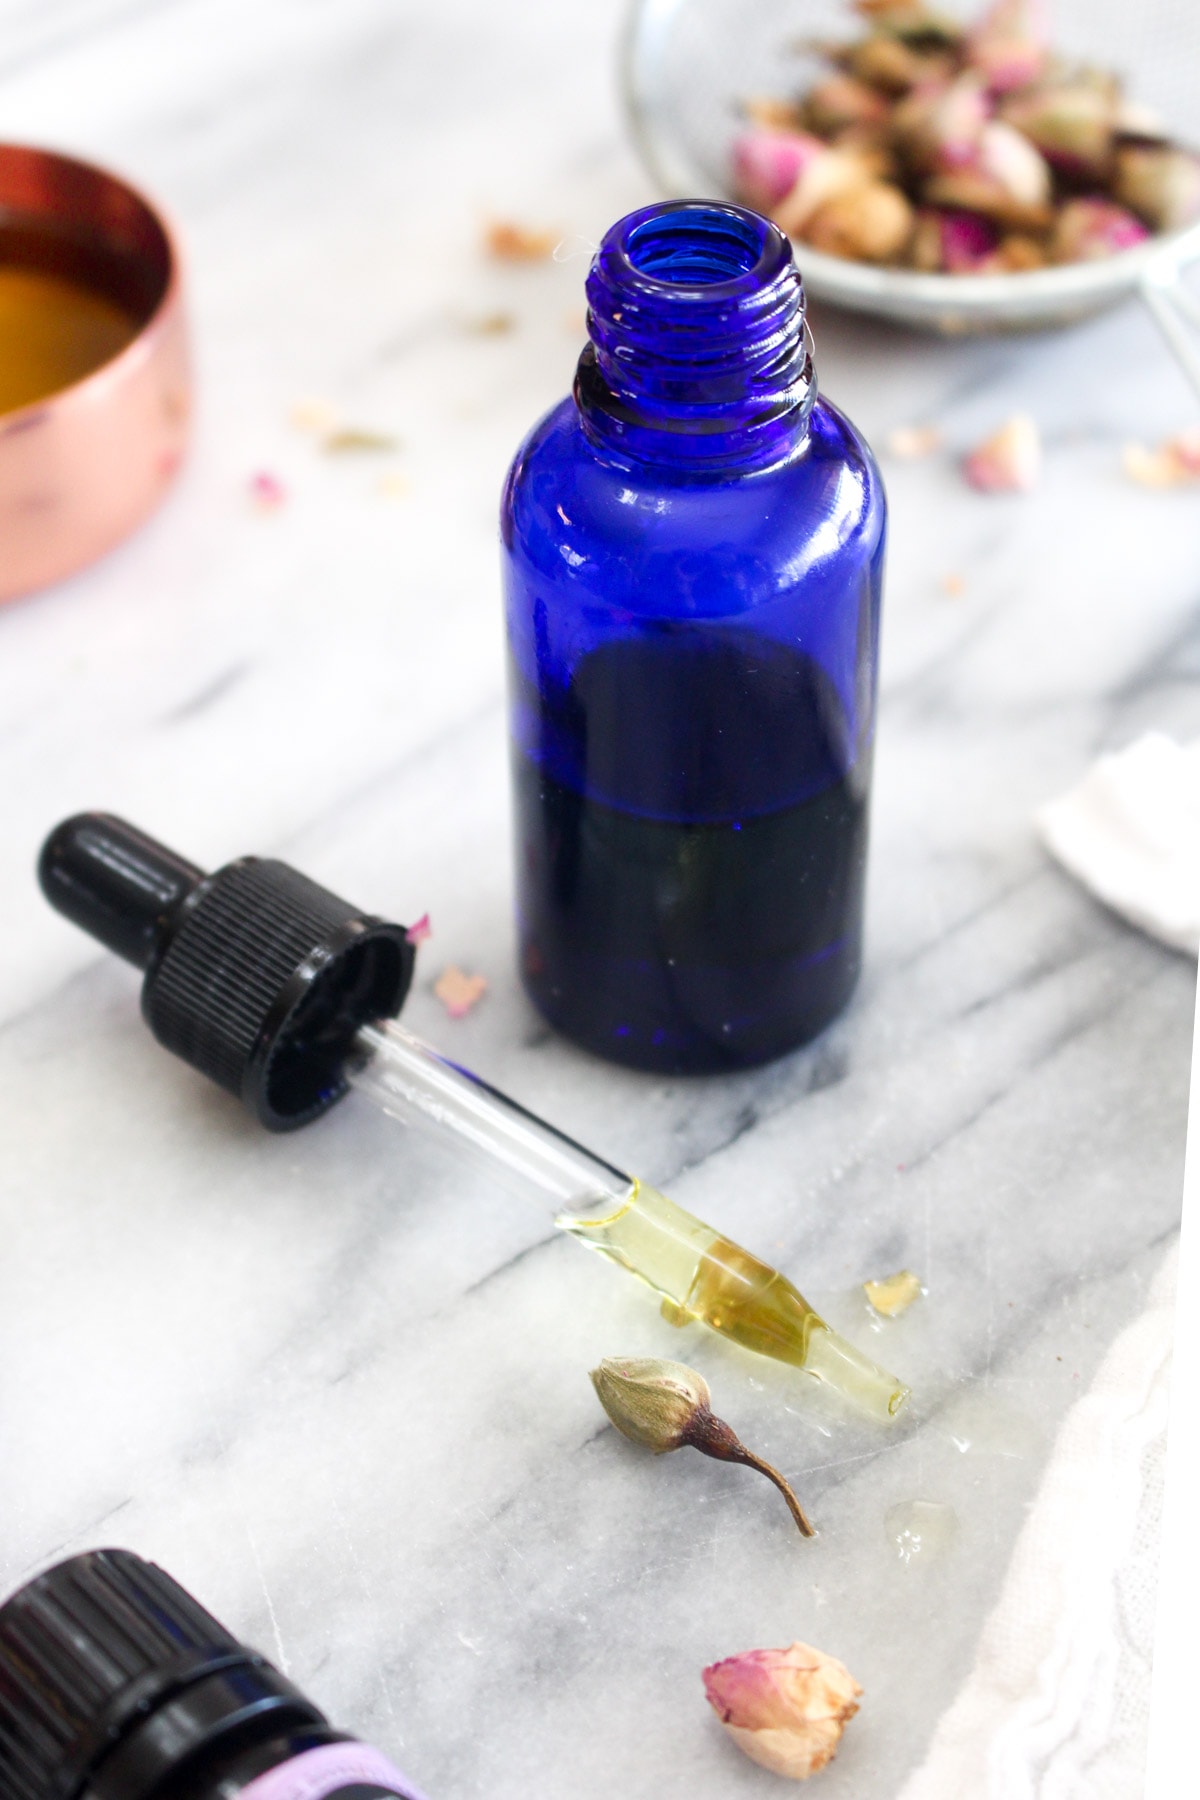 Hydrating Face Serum for Oily Skin is an antioxidant charged facial moisturizer! This easy recipe uses simple non toxic beauty ingredients for glowing skin. | CatchingSeeds.com